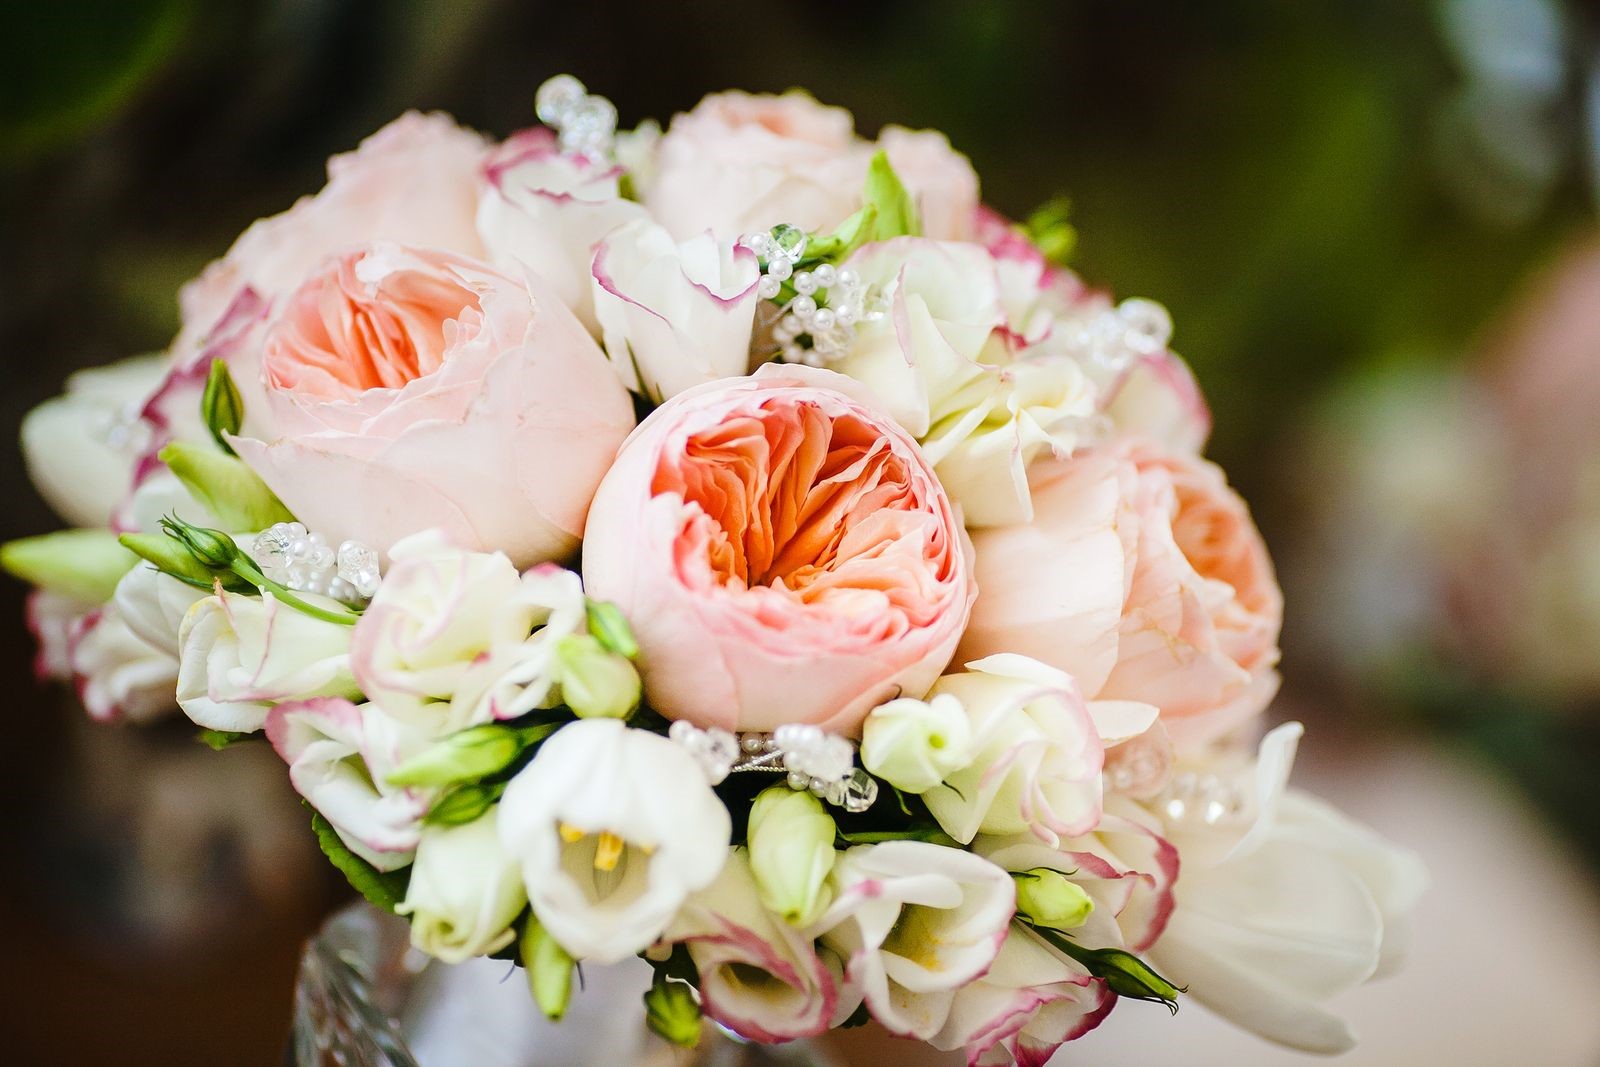 A Wedding Florist Recommends Peonies for a Stunning Bridal Bouquet